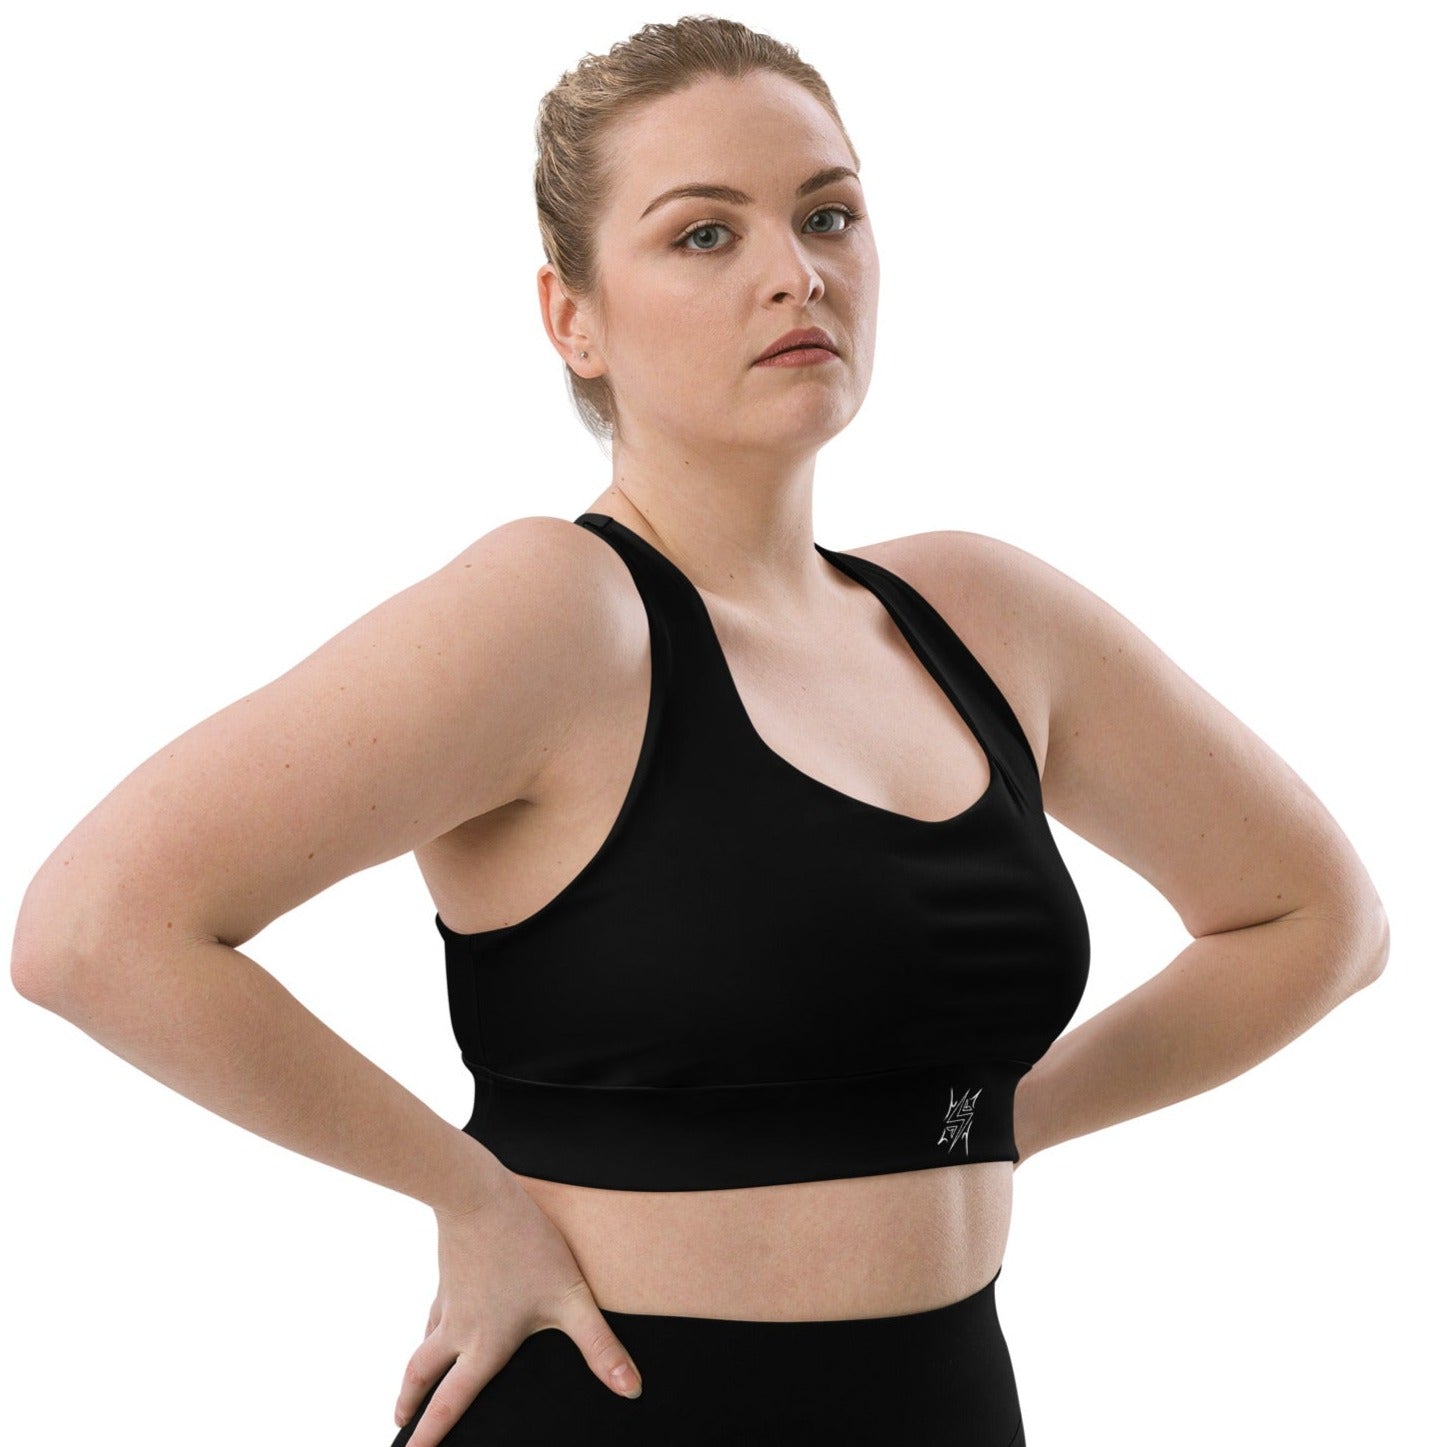 Sofra Seamless Sports Bra (6-Pack) - DailySteals